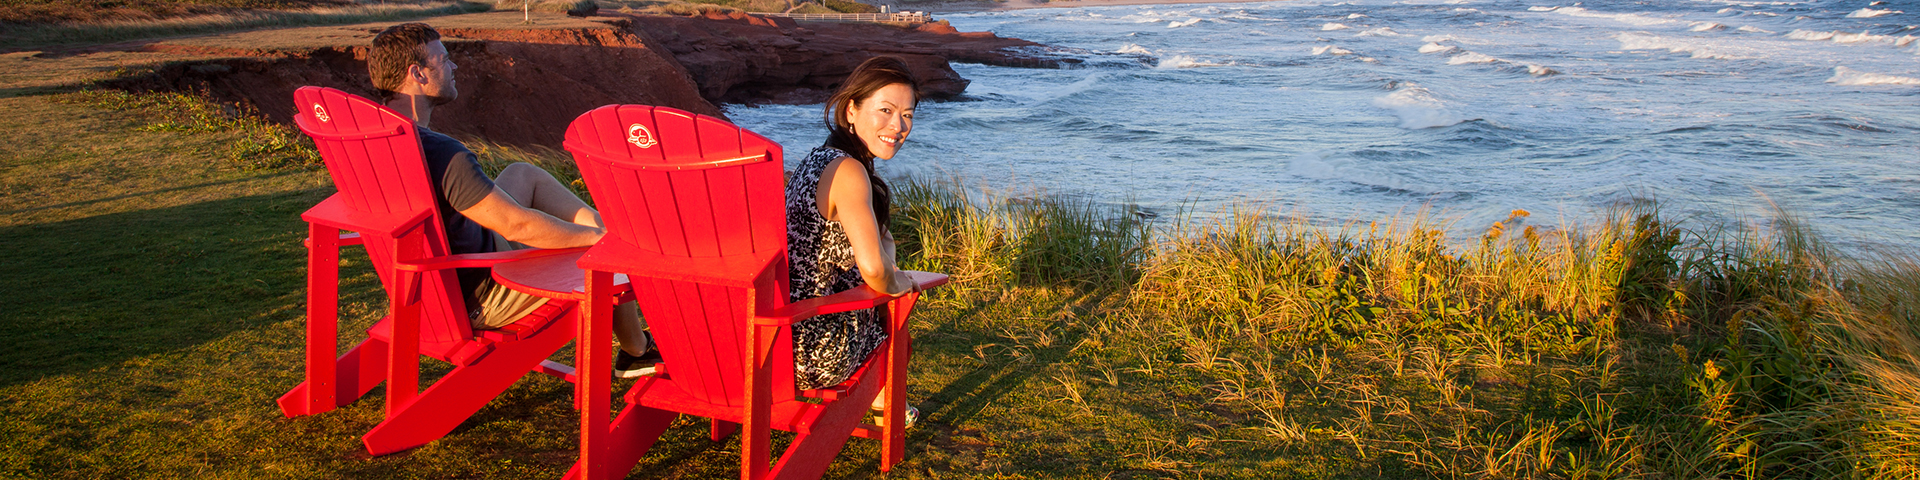 A couple enjoys the view at PEI National Park from the Red Chairs